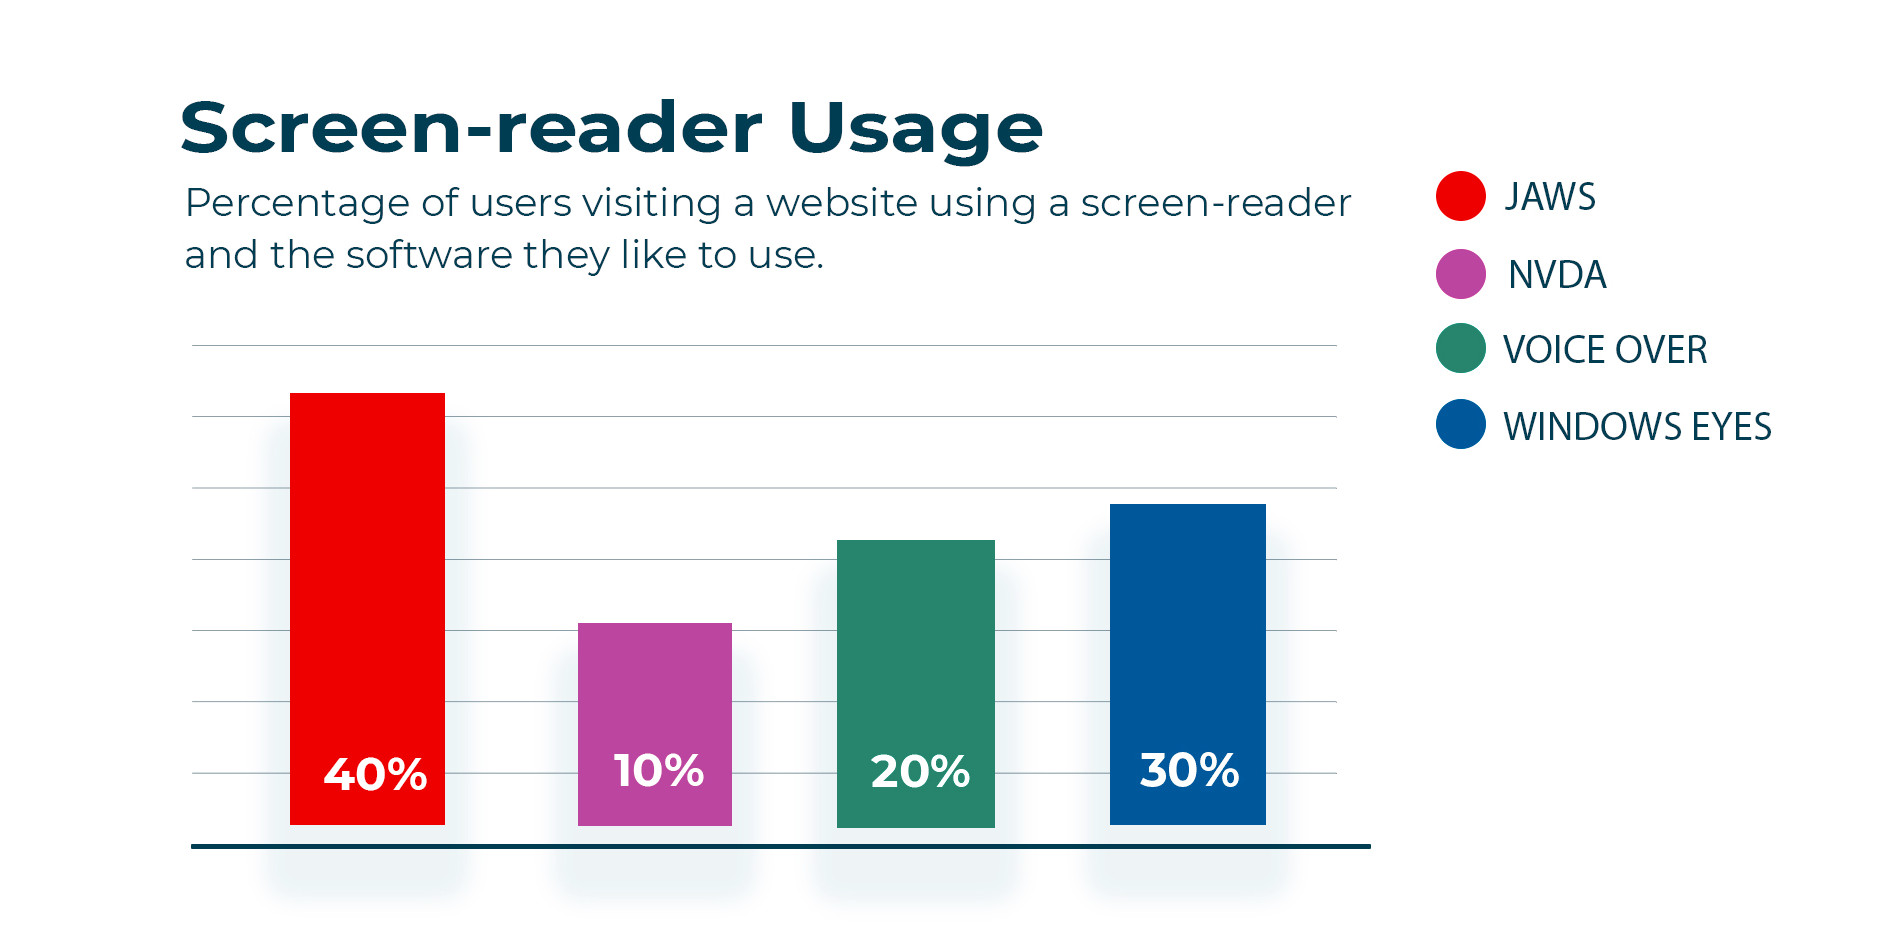 Figure 7 – Blue Weak. An example of a bar chart graphic affected by a Blue Weak color deficiency, the design relies on color to convey meaning. The colors in the graphic are being affected by a blue weak color deficiency. The colors look different from the original design. The graphic reads - Percentage of users visiting a website using a screen-reader and the software they like to use. 40% JAWS, 10% NVDA, 20% Voice Over, 30% Windows Eyes.